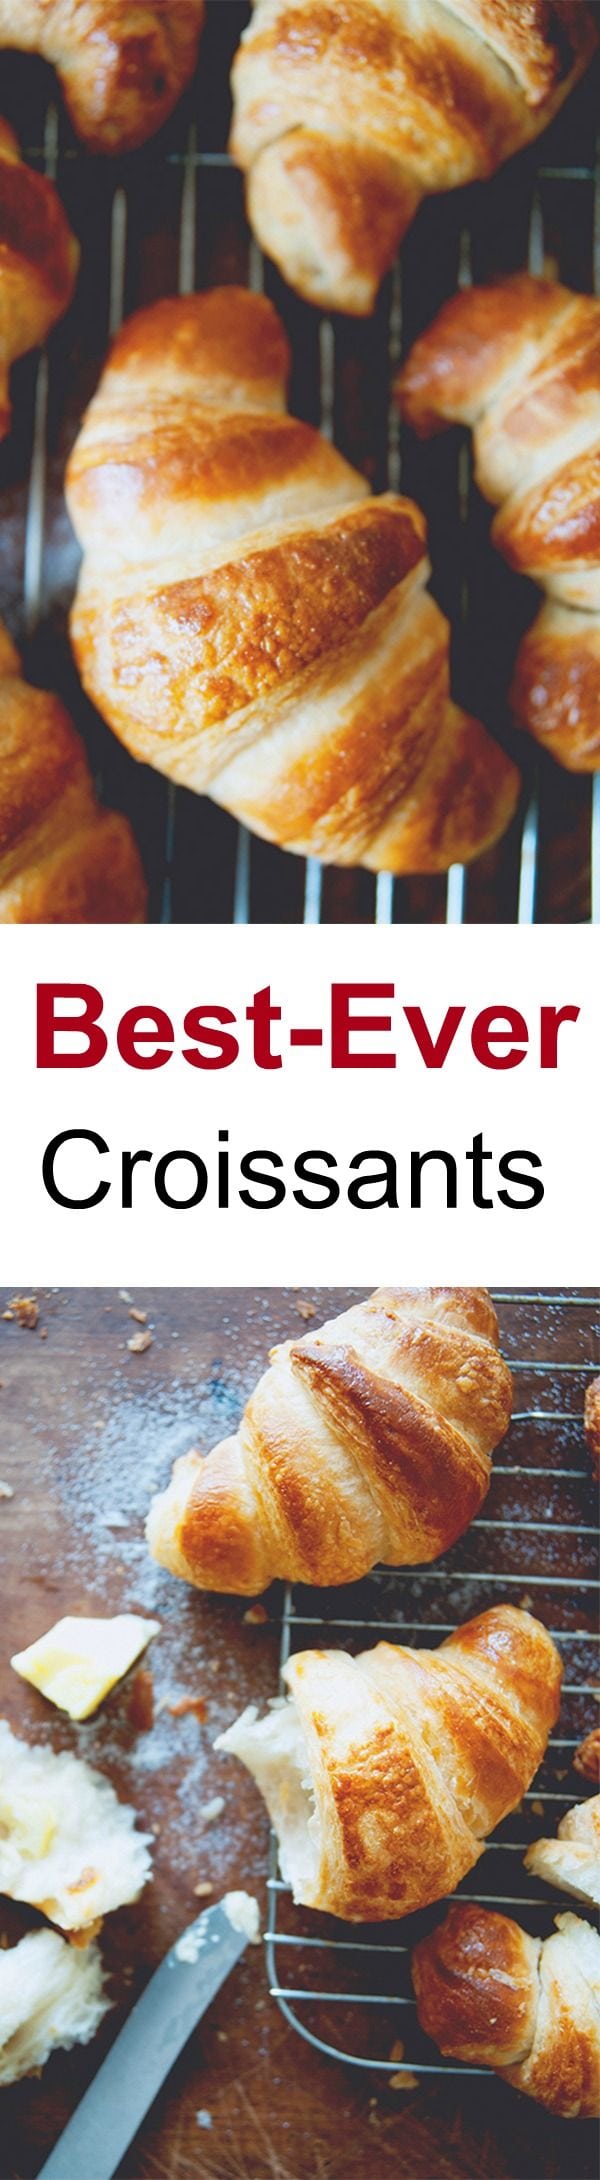 Croissants - Homemade croissants with this easy and fail-proof recipe from The Kitchy Kitchen. Buttery, flaky, golden and crunchy | rasamalaysia.com